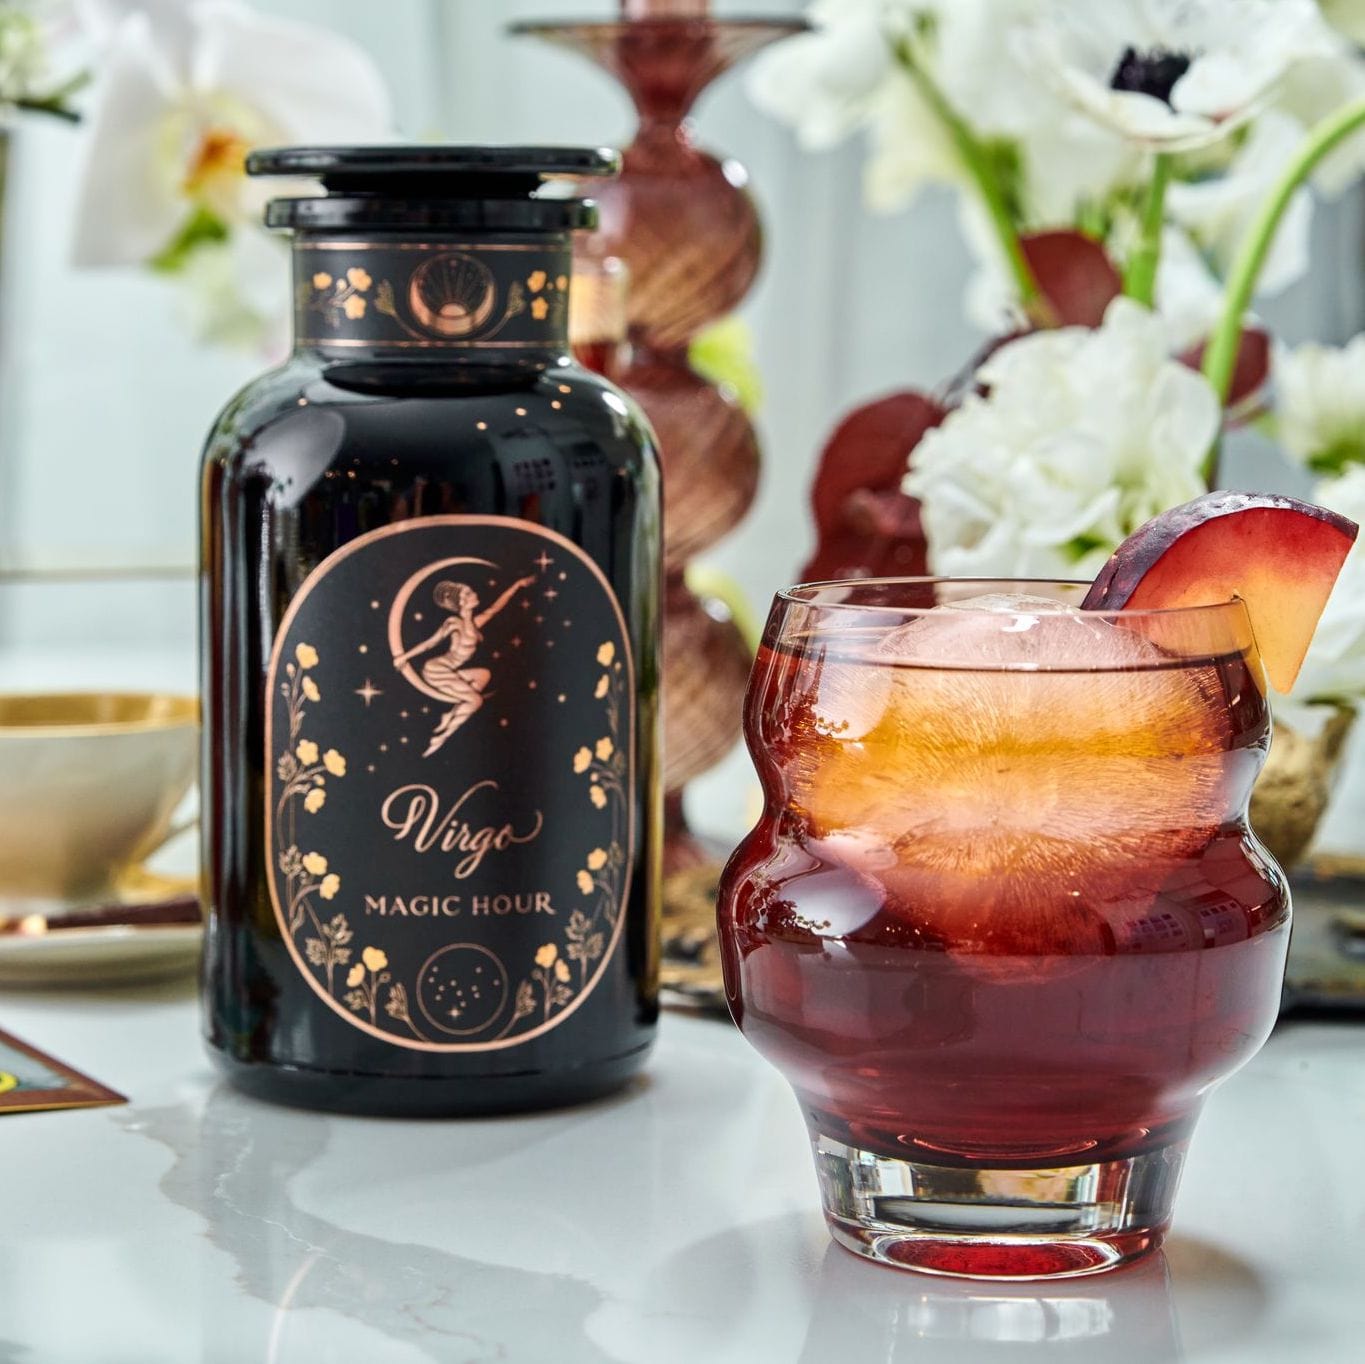 A glass of iced plum-colored drink garnished with a plum slice sits next to a black bottle labeled &quot;Virgo Tea of Virtue, Wit &amp; Meticulous Magic&quot; decorated with gold celestial designs. The background features a teacup, white flowers, and decorative vases, evoking the soothing essence of Magic Hour.